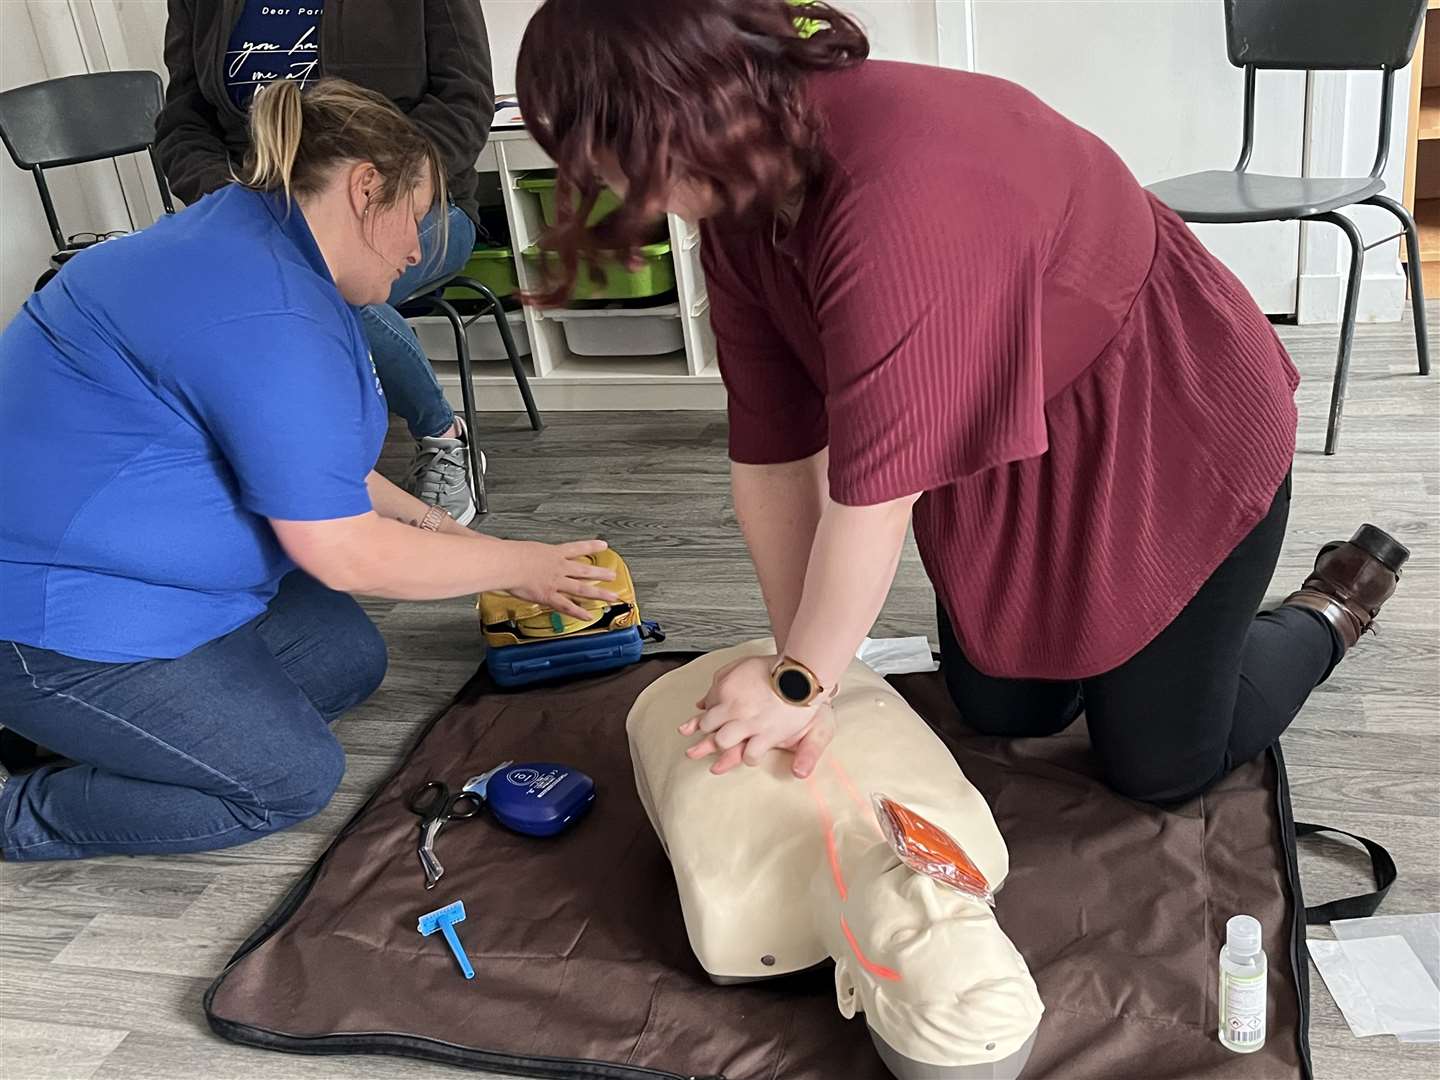 Jennifer Smith fromthe club (left) and parent Elysia-Rose Barksby pretend they have found someone who is not breathing. They assessed the situation for dangers before Elysia-Rose started CPR while Jennifer prepared to use the defibrillator to try and resuscitate the person by shocking their heart.